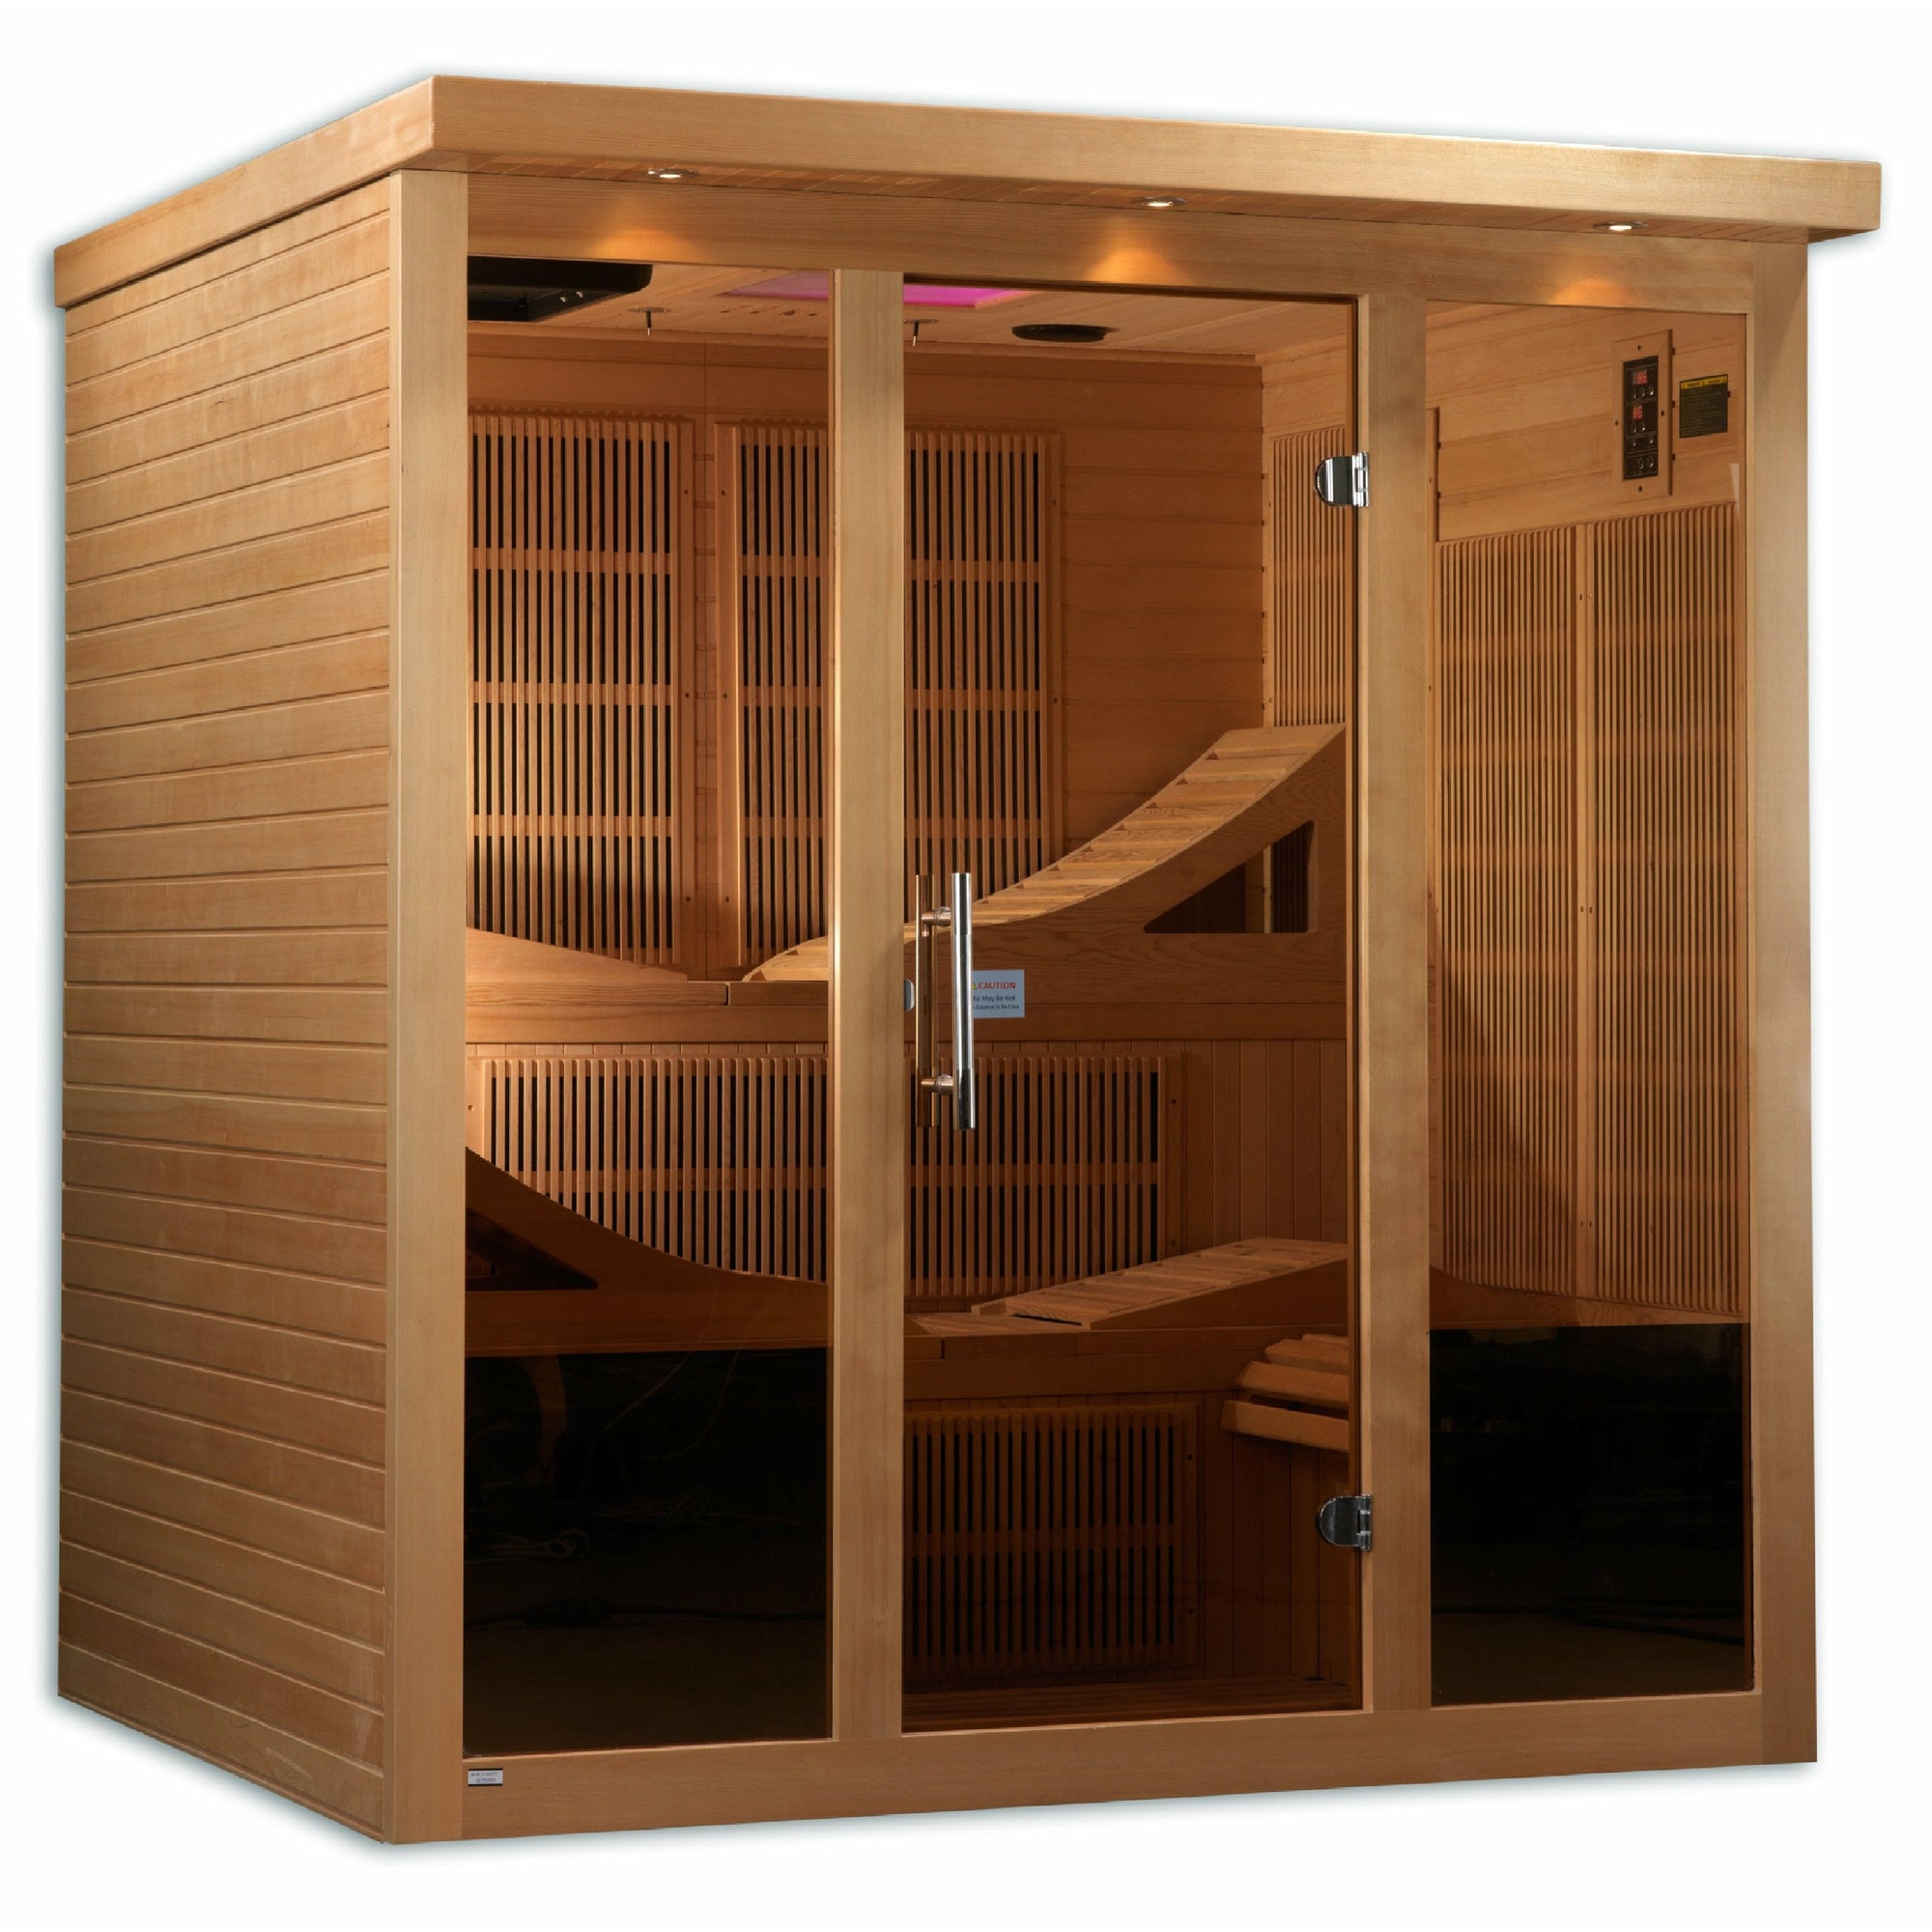 Near Zero EMF Far Infrared Sauna - Natural hemlock wood construction with FM/CD radio with MP3 auxiliary connection, Interior reading/chromotherapy lighting system, Interior and exterior LED control panel, Electrical service, Carbon PureTech™ Near Zero EMF Heat Emitters, Tempered glass door,  Roof vent in a white background